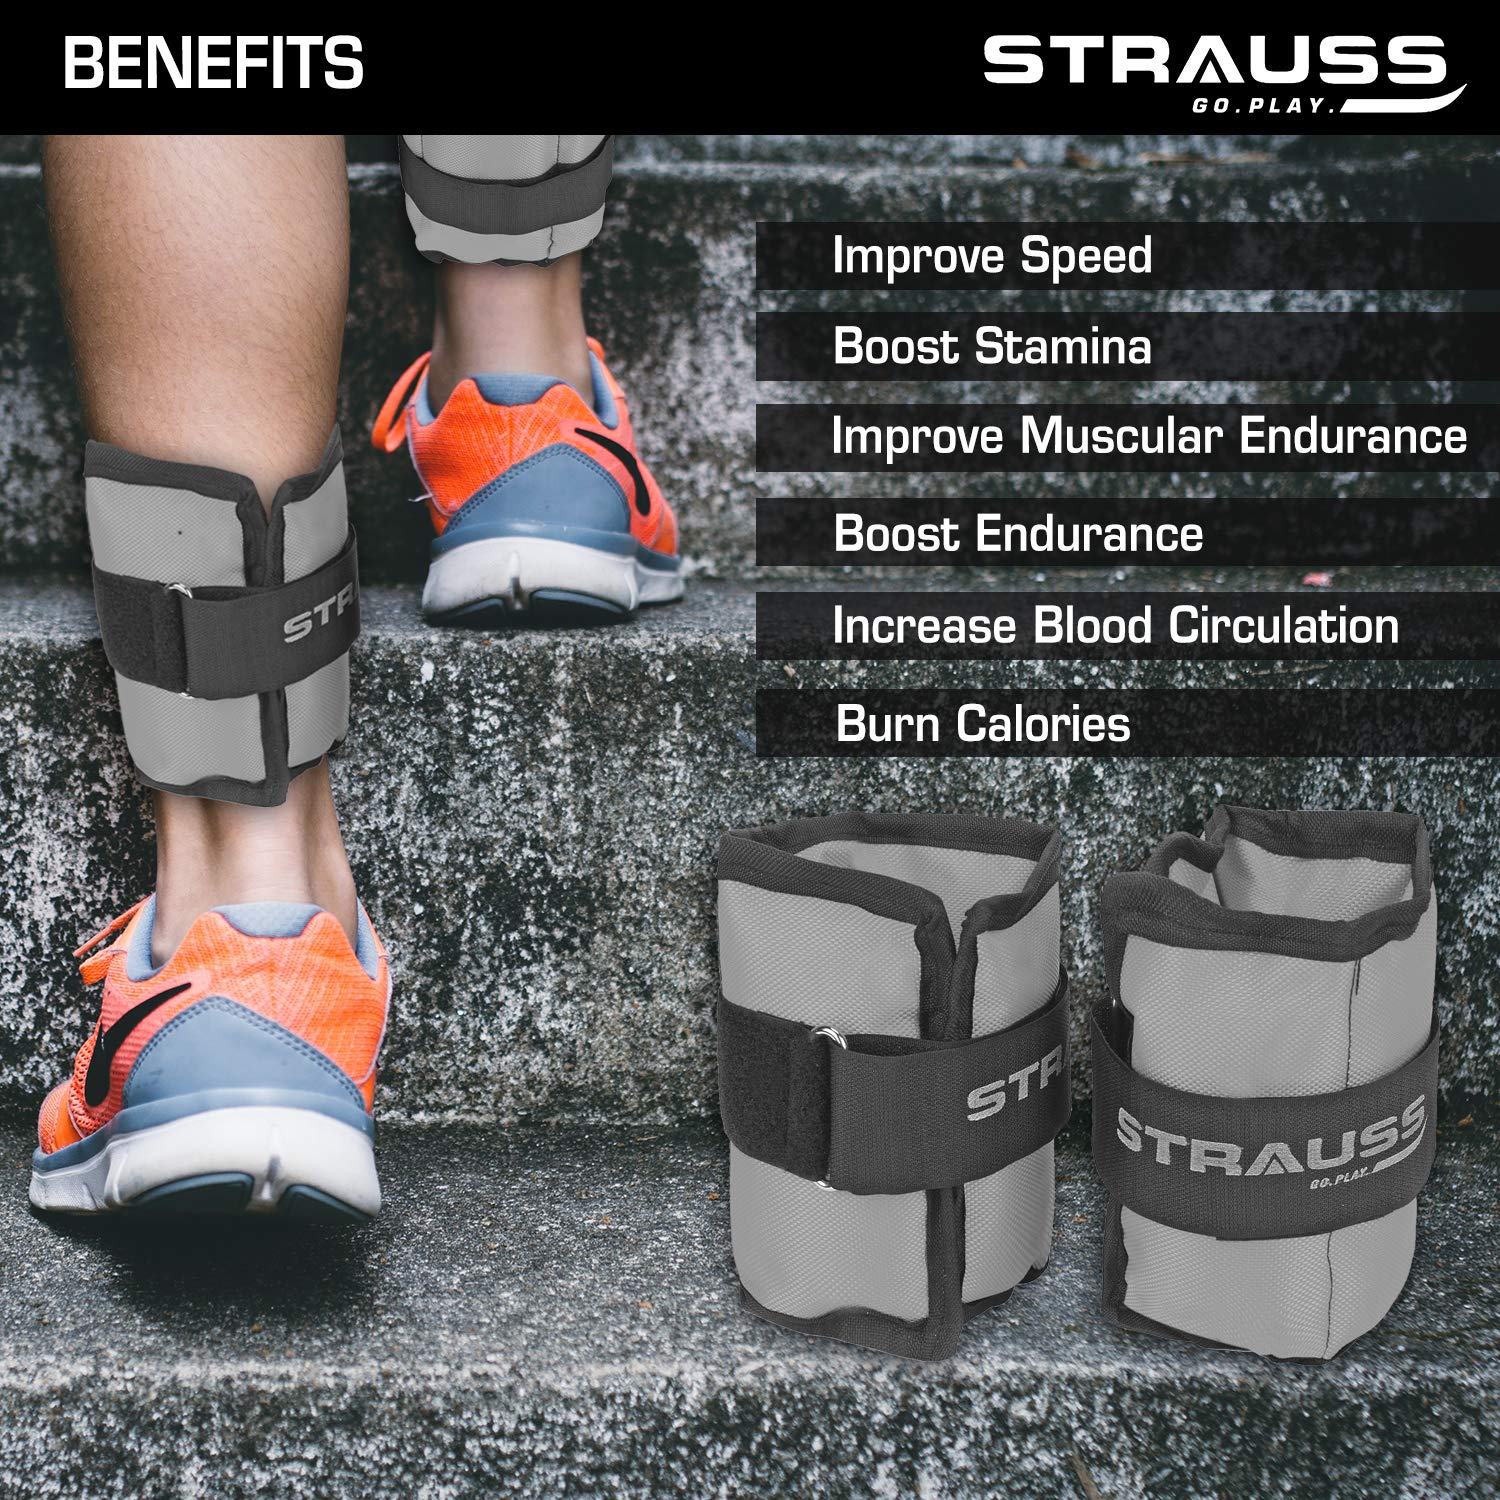 Strauss Adjustable Ankle/Wrist Weights 0.5 KG X 2 | Ideal for Walking, Running, Jogging, Cycling, Gym, Workout & Strength Training | Easy to Use on Ankle, Wrist, Leg, (Grey)